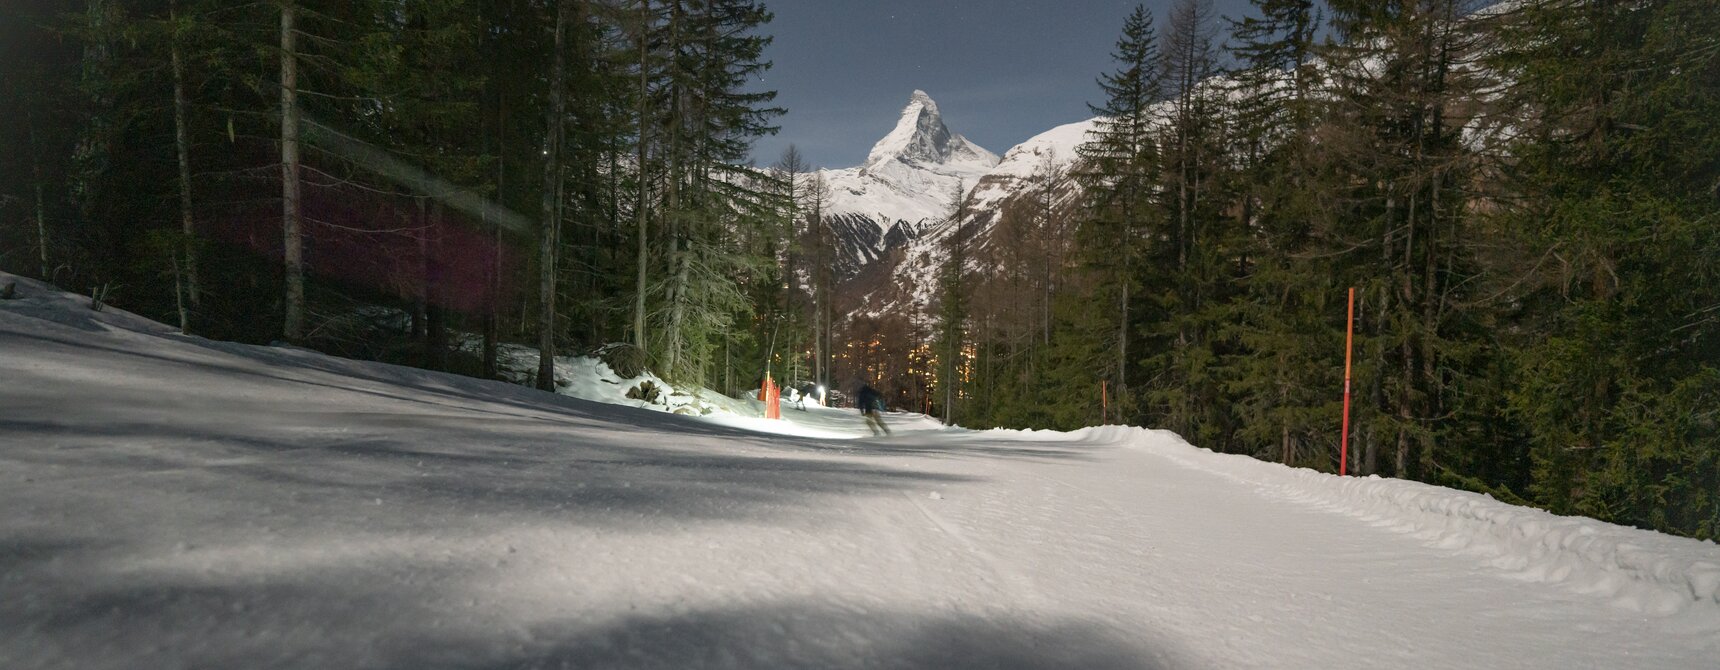 Slope in the dark with a skier , the Matterhorn in the background | © Gabriel_Perren